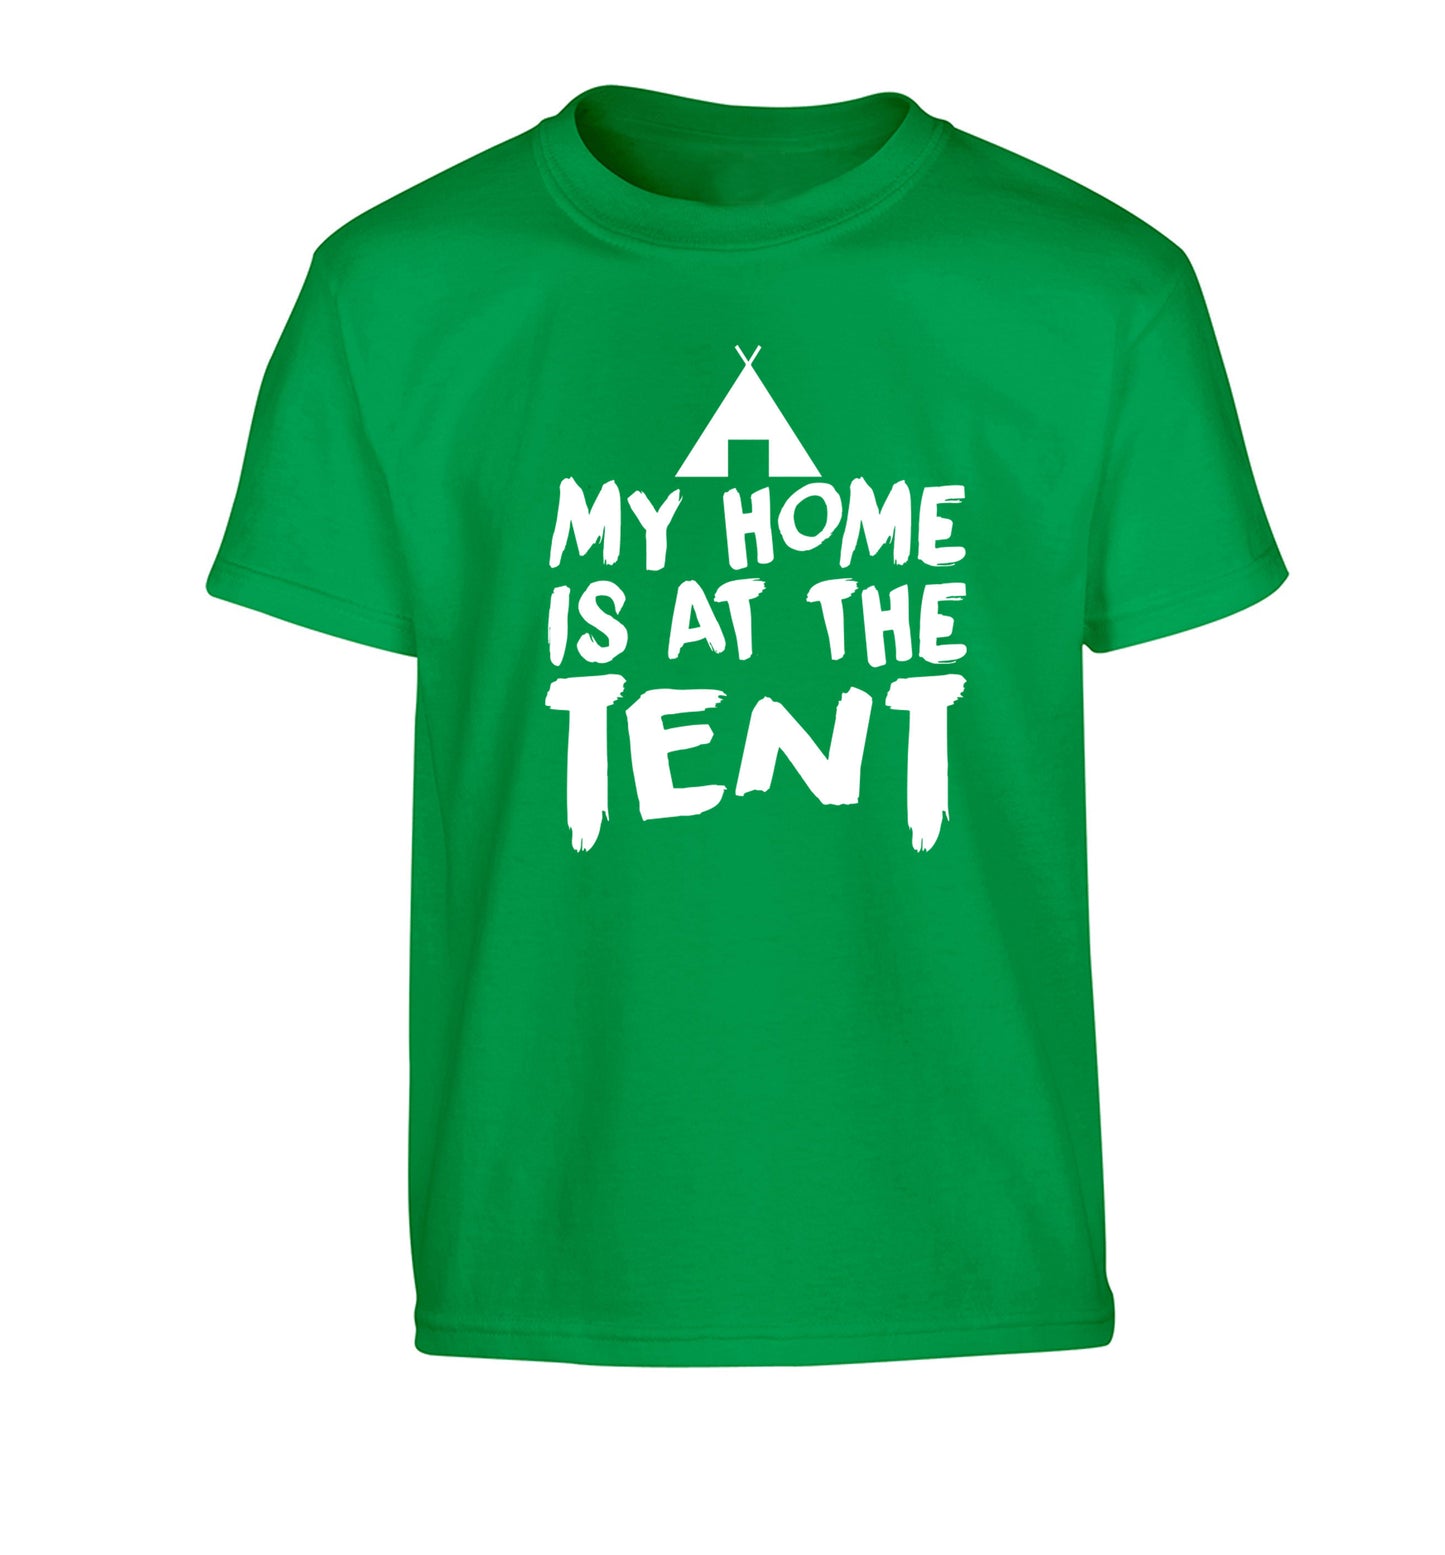 My home is at the tent Children's green Tshirt 12-14 Years